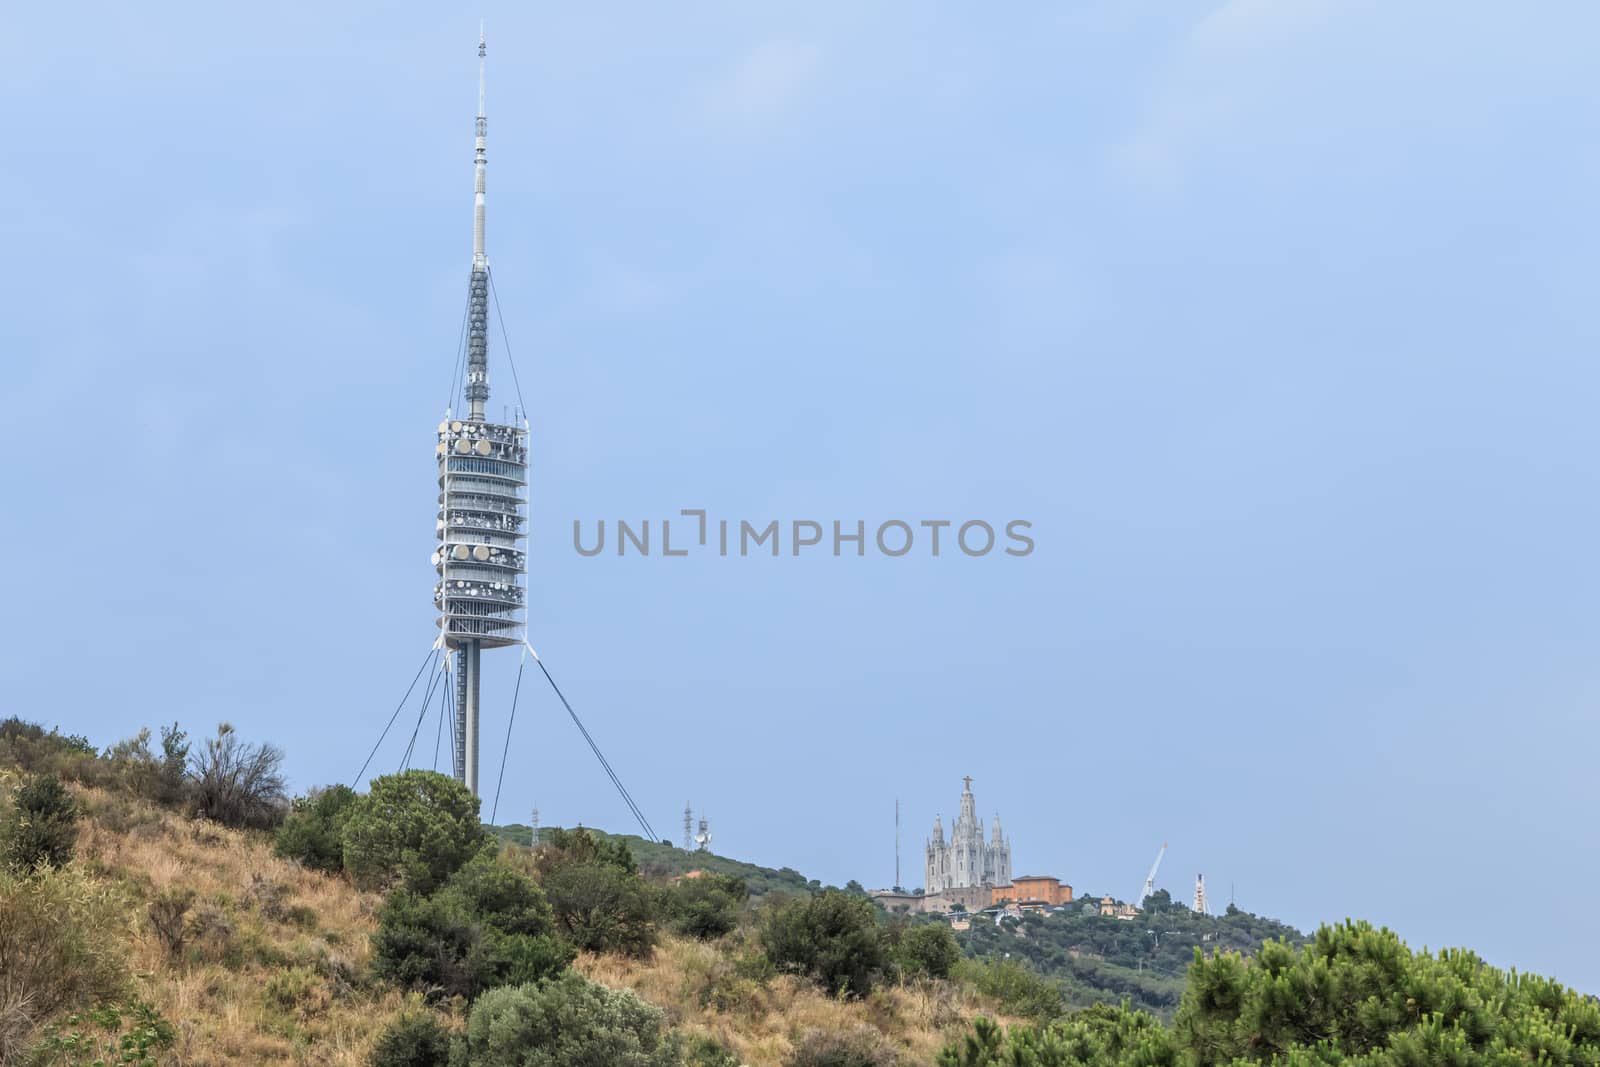 Barcelona, Spain - June 21, 2017: View of the Collserola telecommunications tower on the heights of Barcelona on a summer day